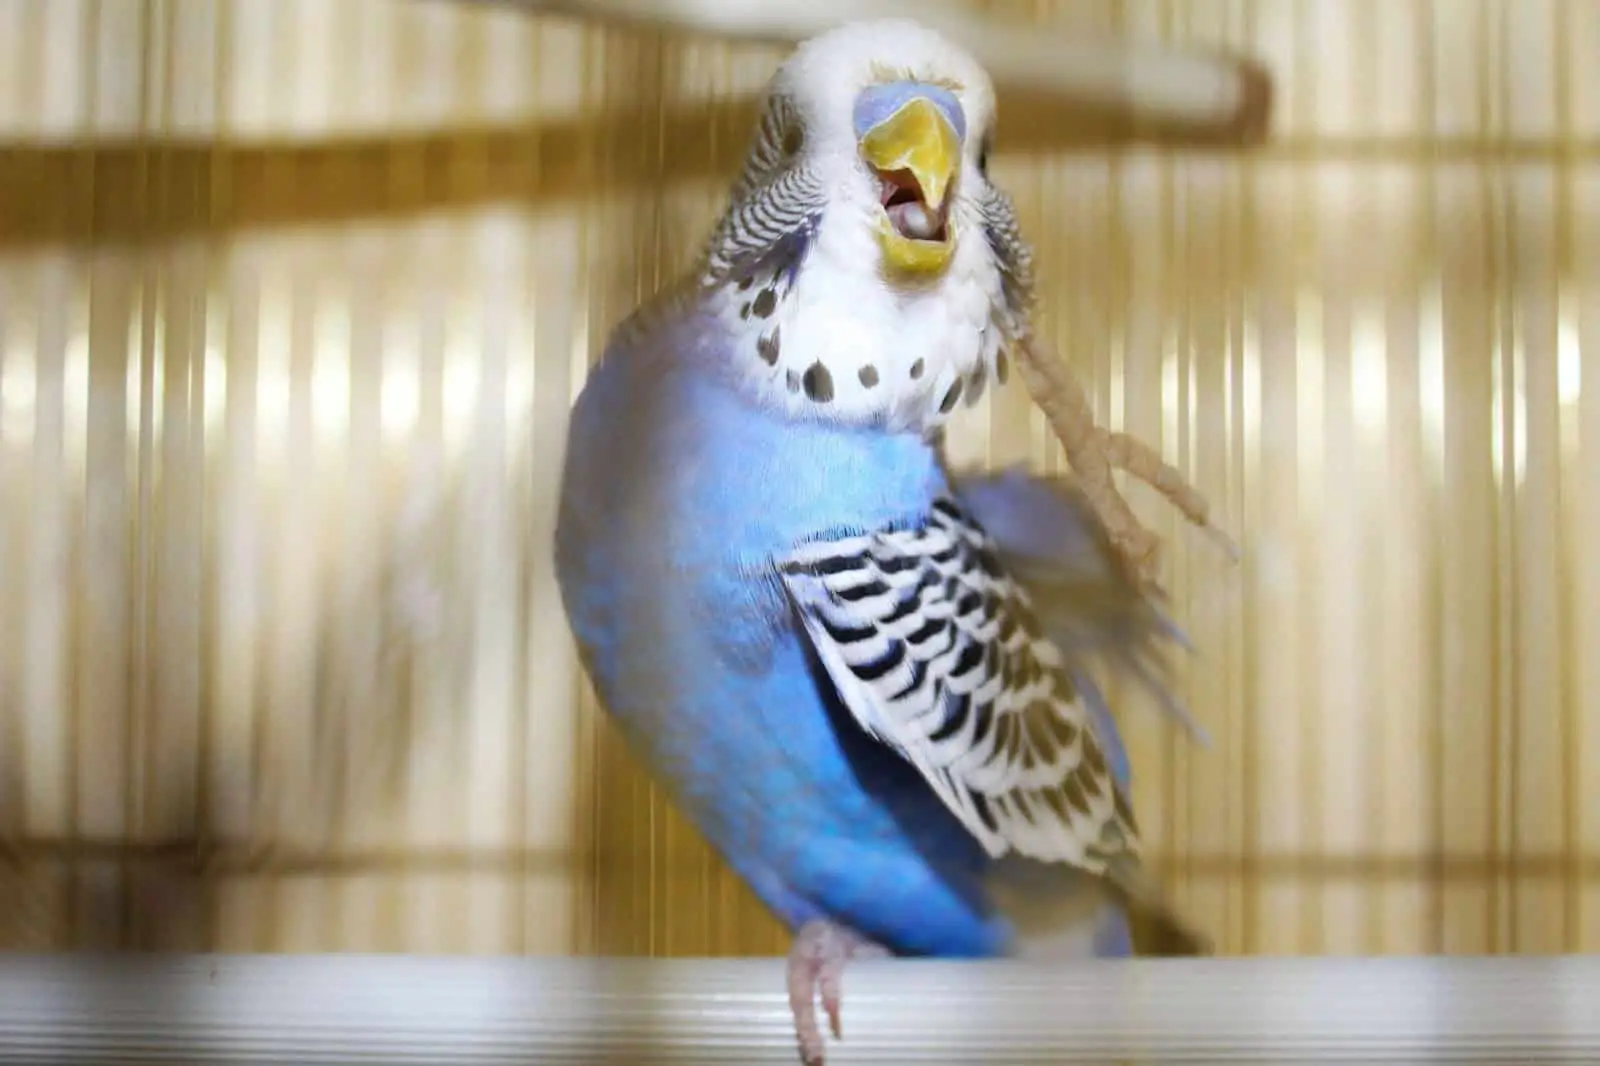 A budgies scratches to relieve itching from mites. Learn about managing budgies and mites at Petrestart.com.